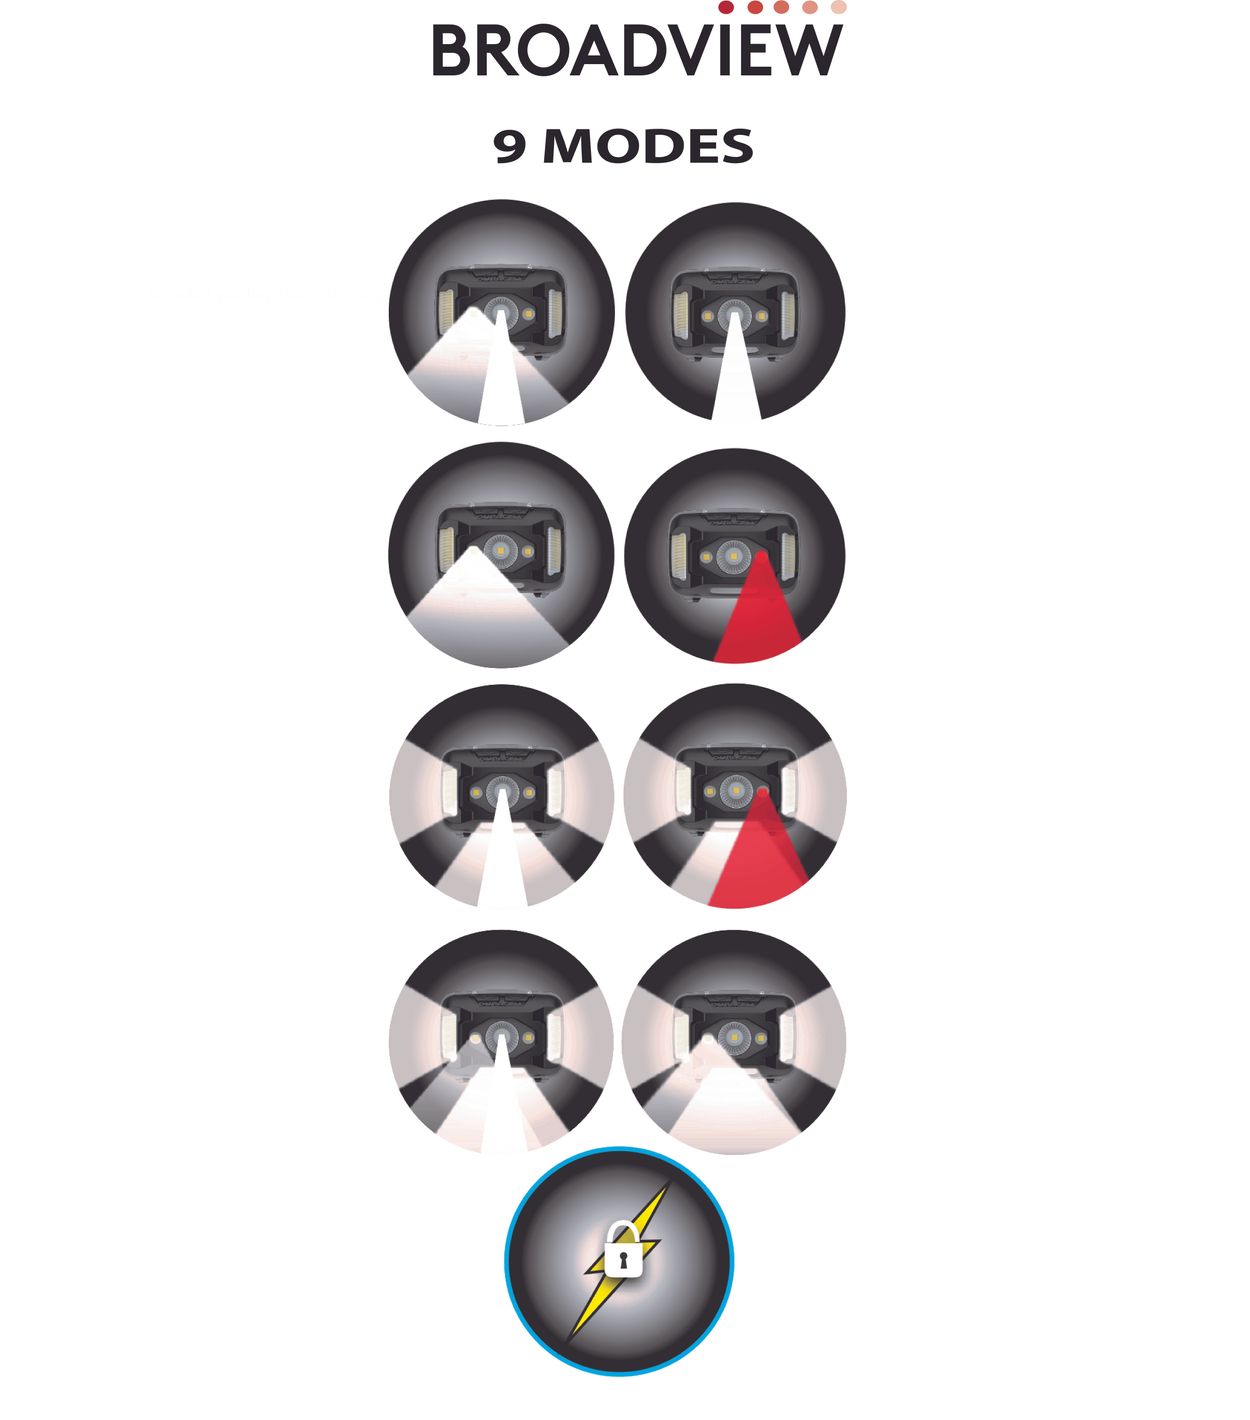 image illustrating the 9 modes of the headlamp